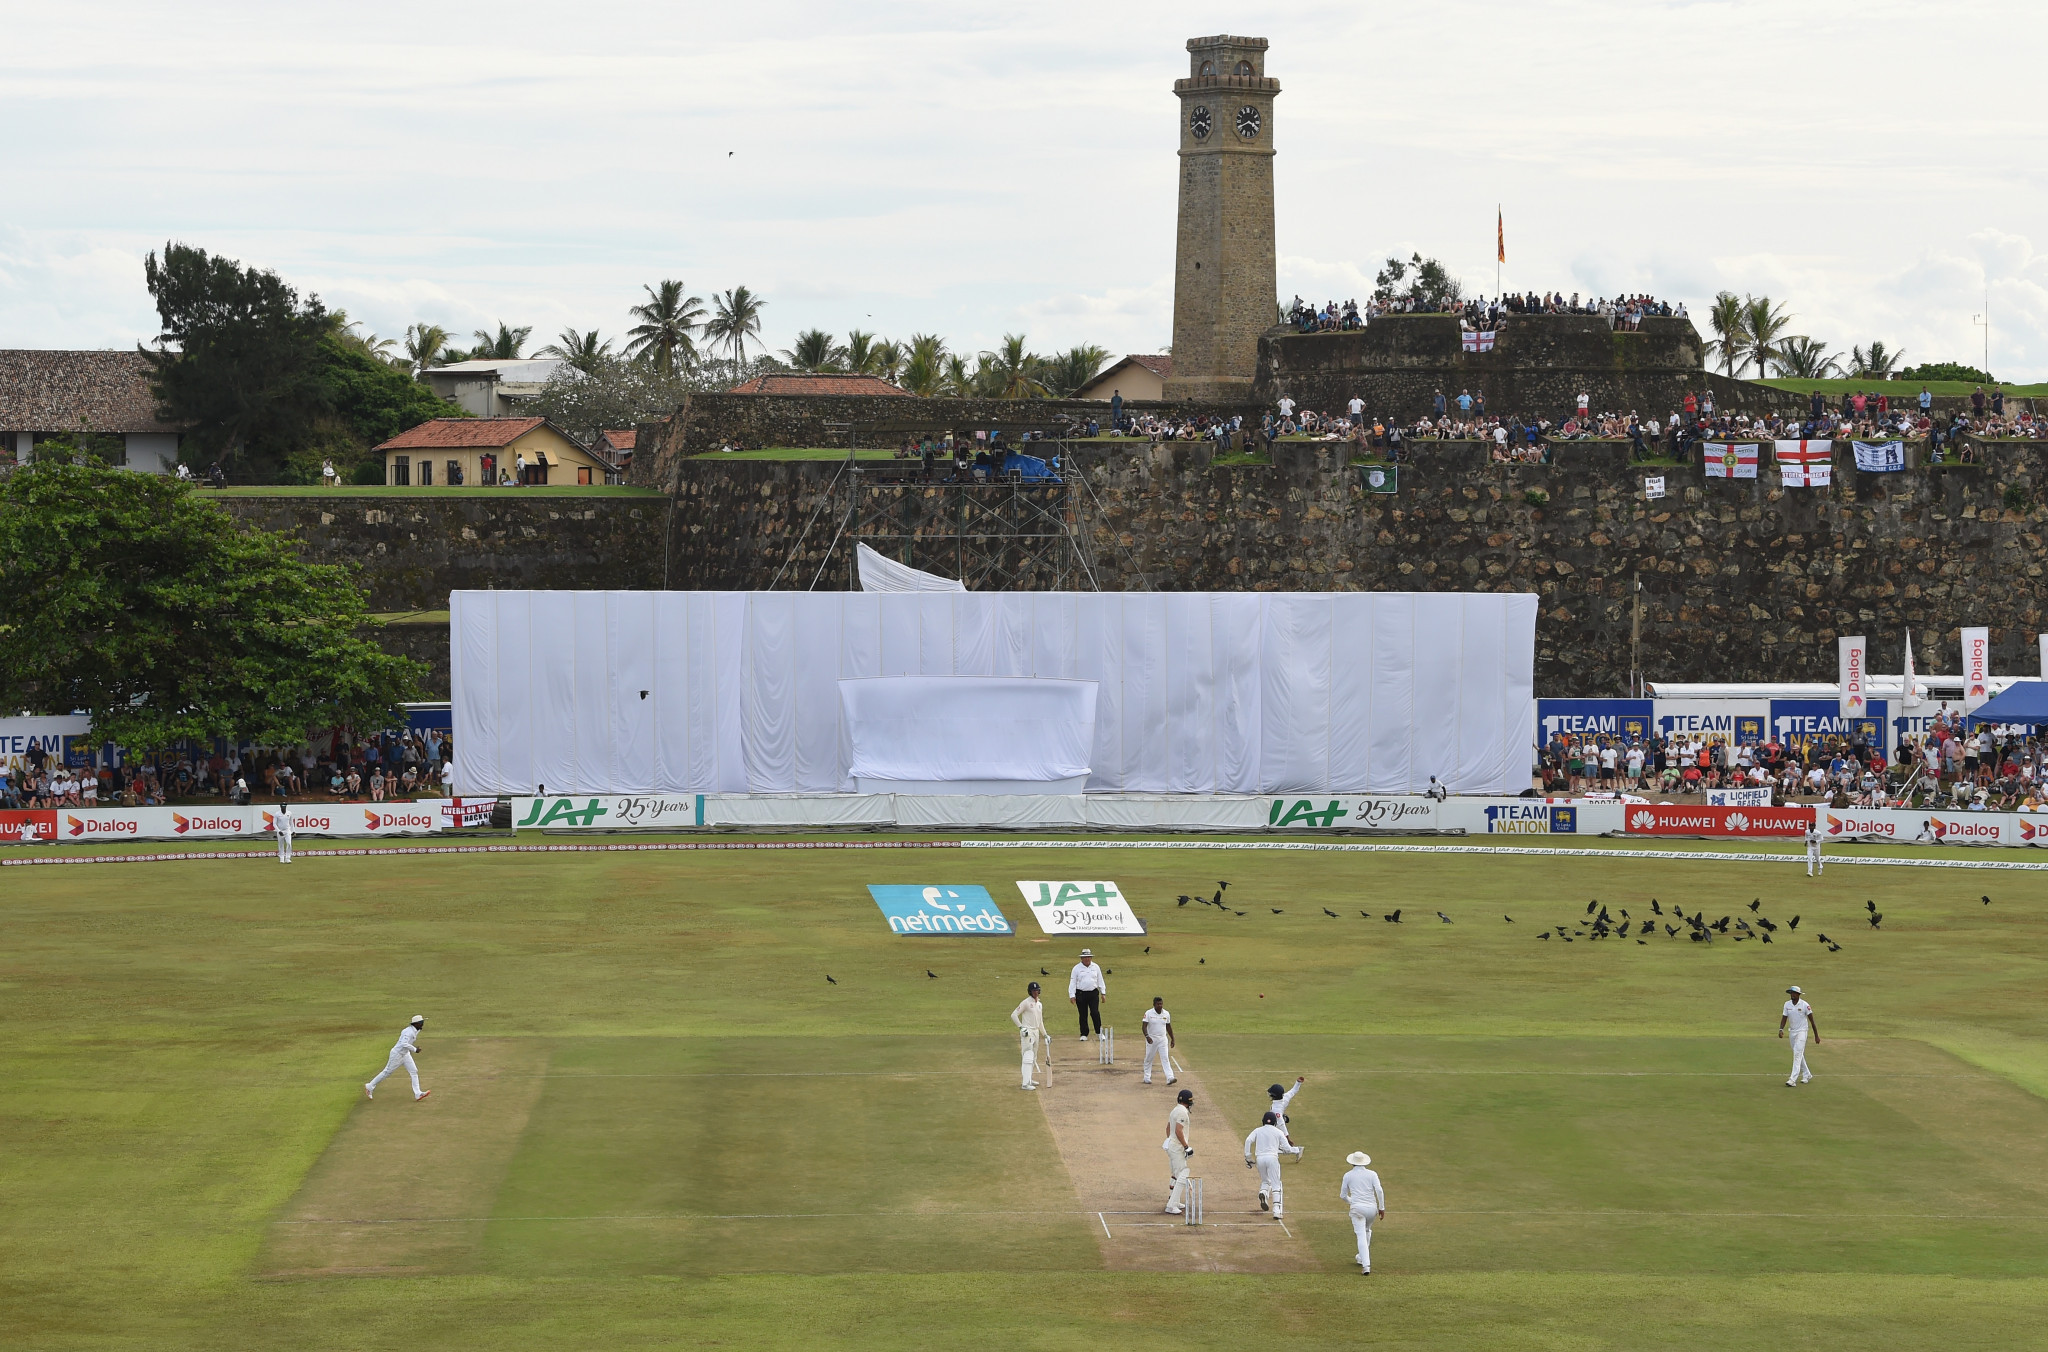 A television documentary aired by Al-Jazeera reportedly showed the Galle groundsman claiming he could adjust the wicket for betting purposes ©Getty Images